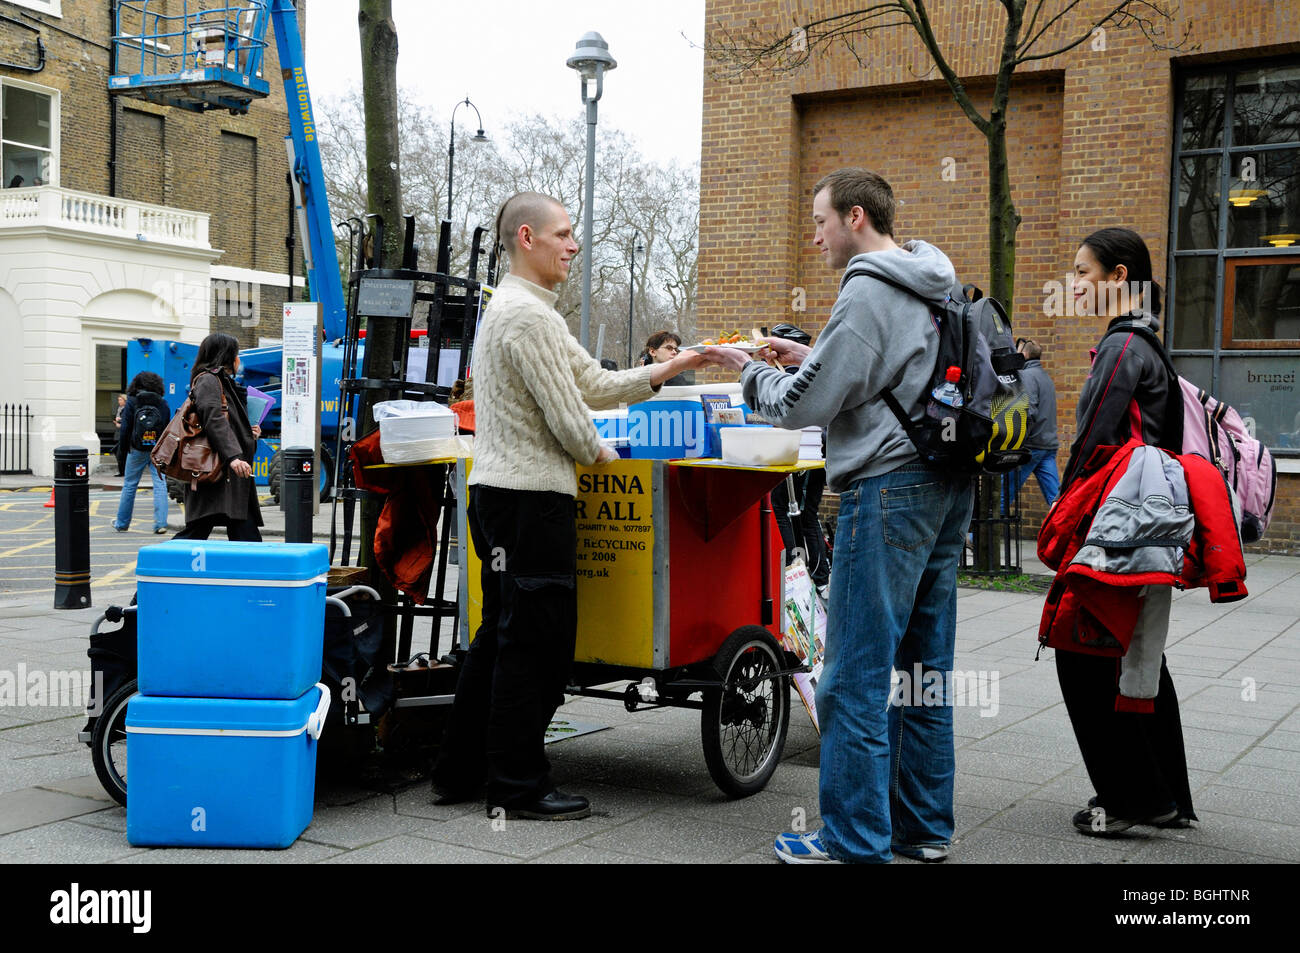 Man from the Hare Krishna Movement serving free food to students and passers by London England UK Stock Photo